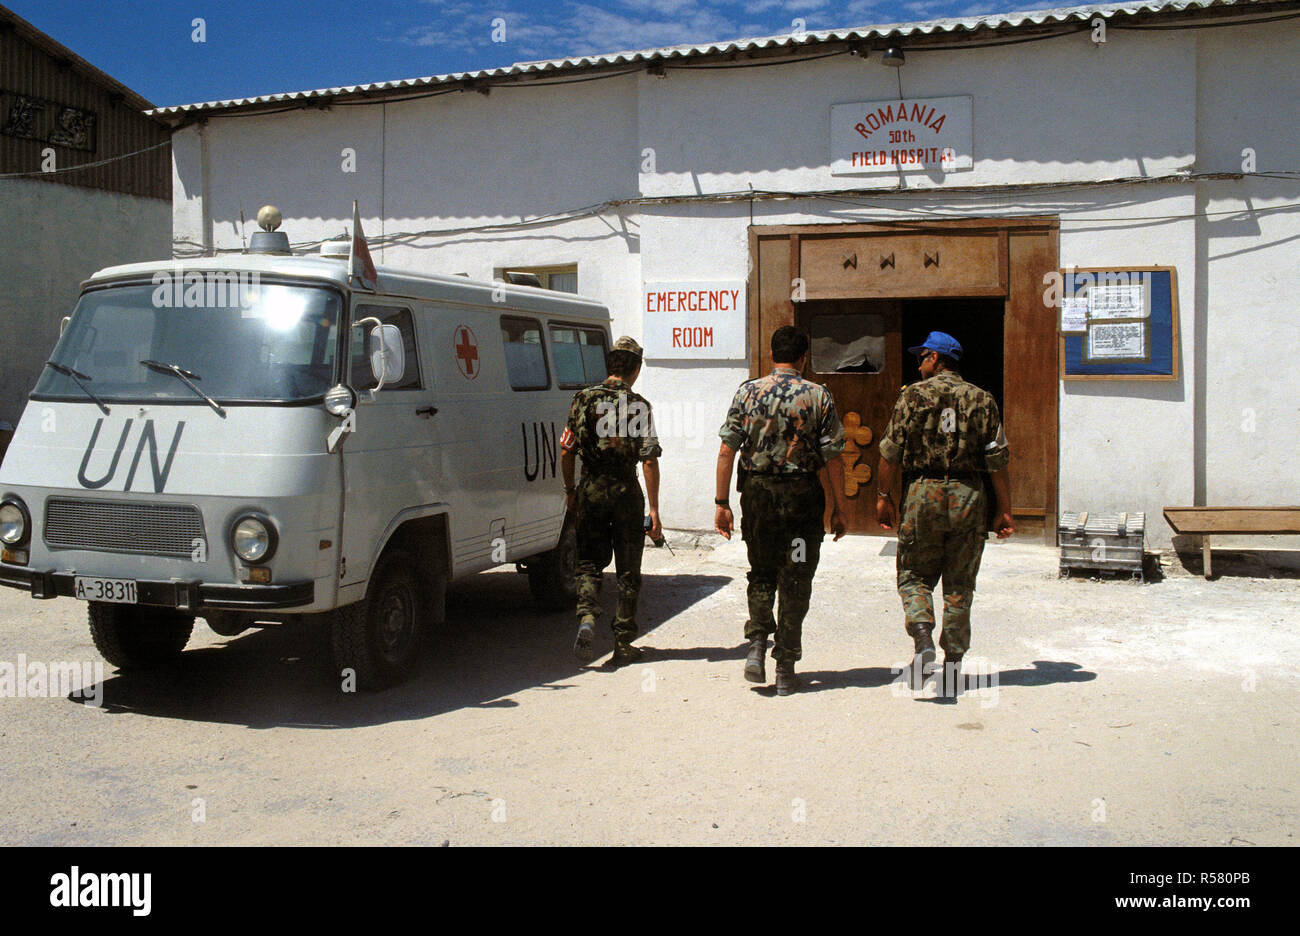 1993 - An ambulance is backed up to the Emergency Room entrance to the United Nations field hospital in Mogadishu.  The hospital is administered by the Romanians. Stock Photo